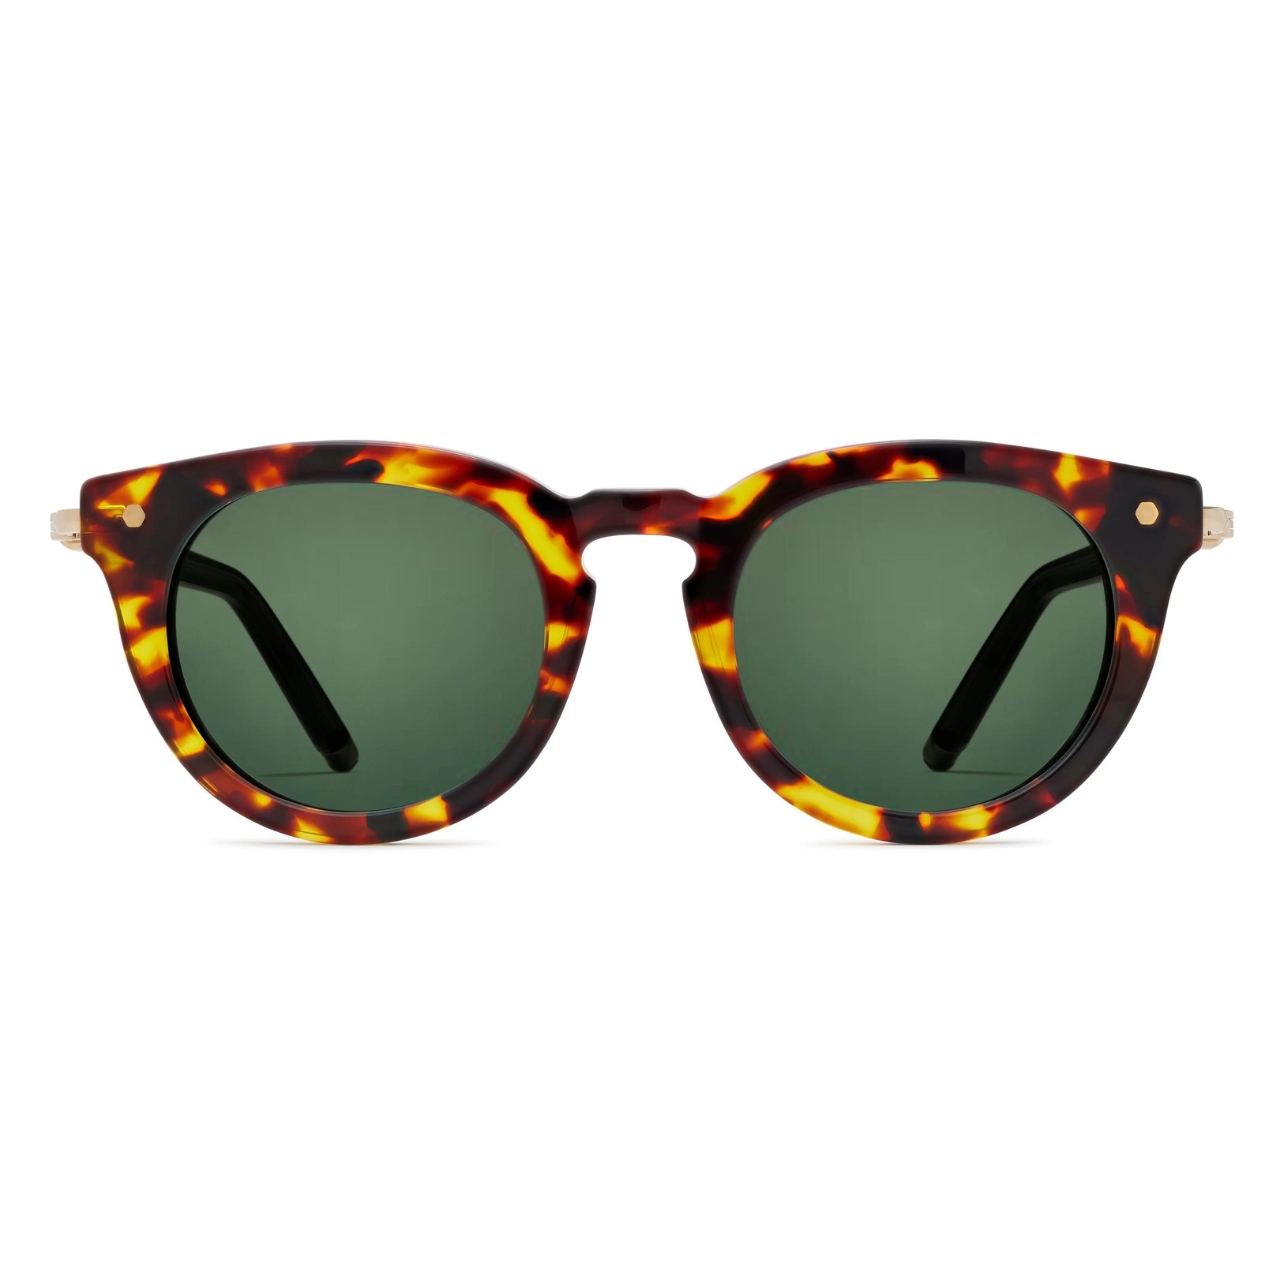 Morgenthal Frederics Nineties series glasses made with acetate and titanium in tortoise and green